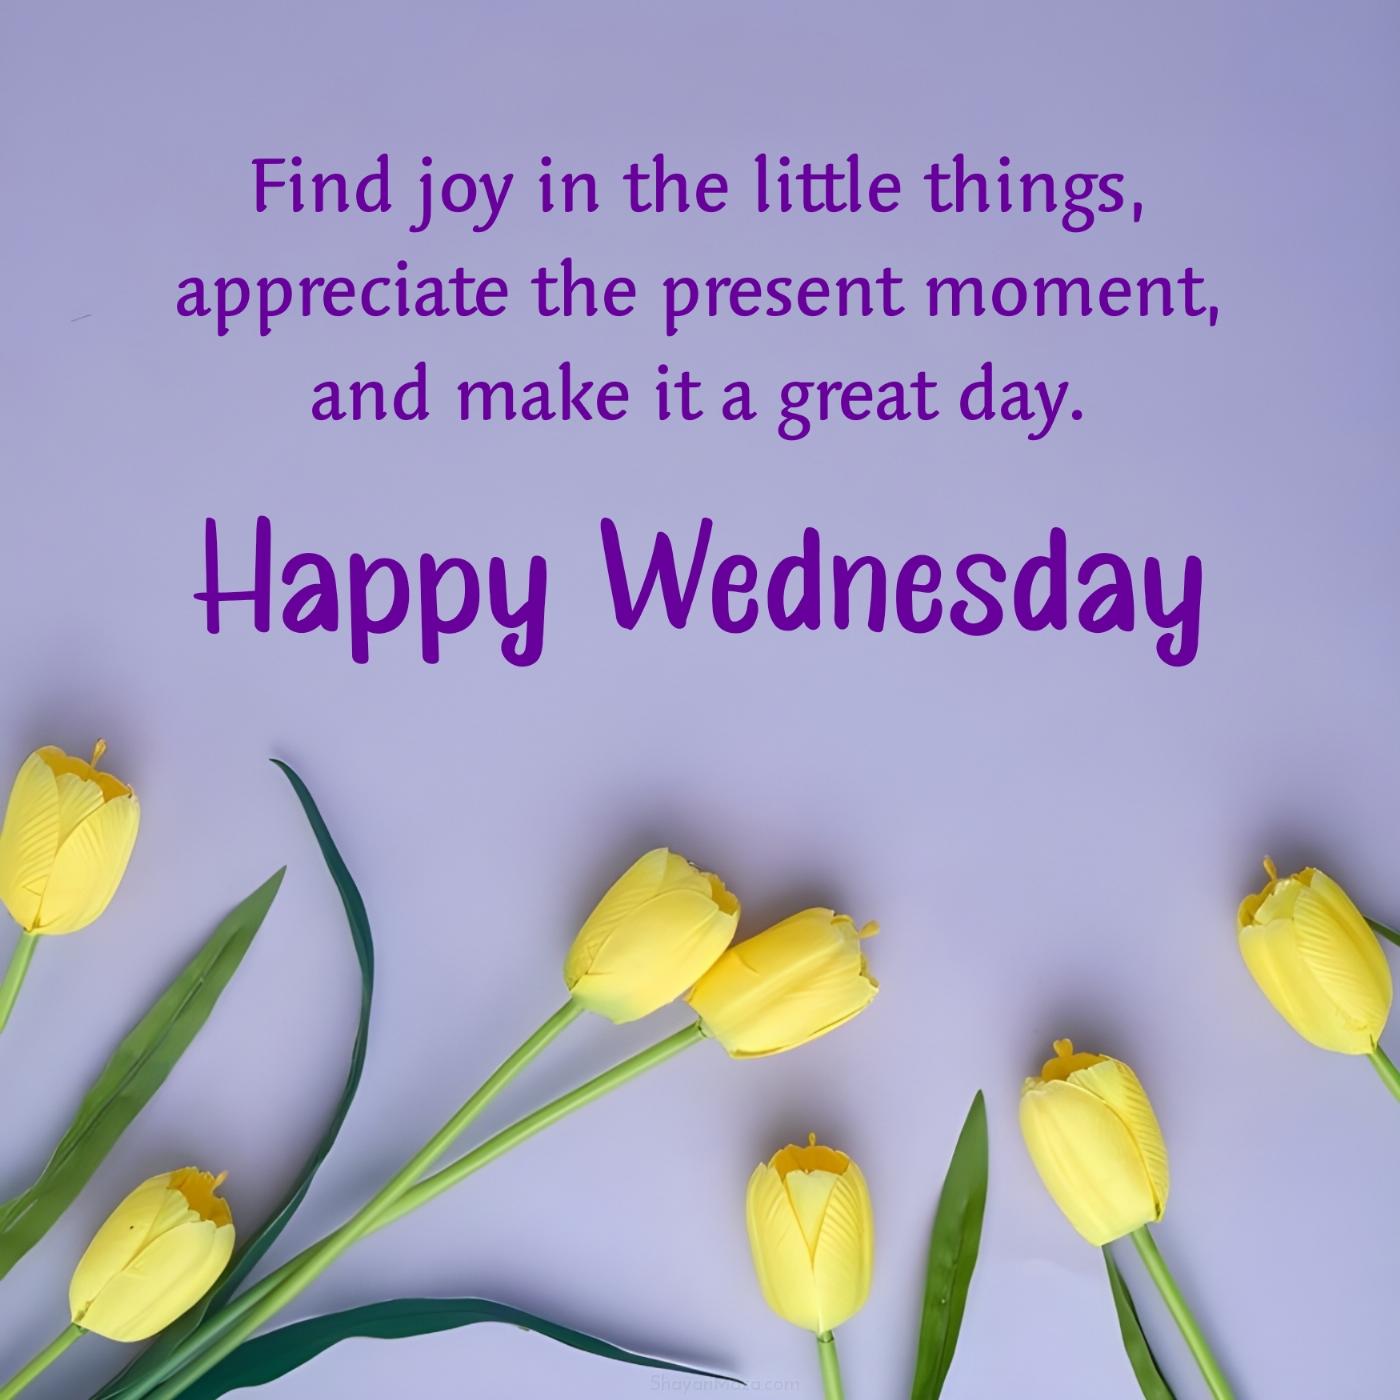 Happy Wednesday! Find joy in the little things